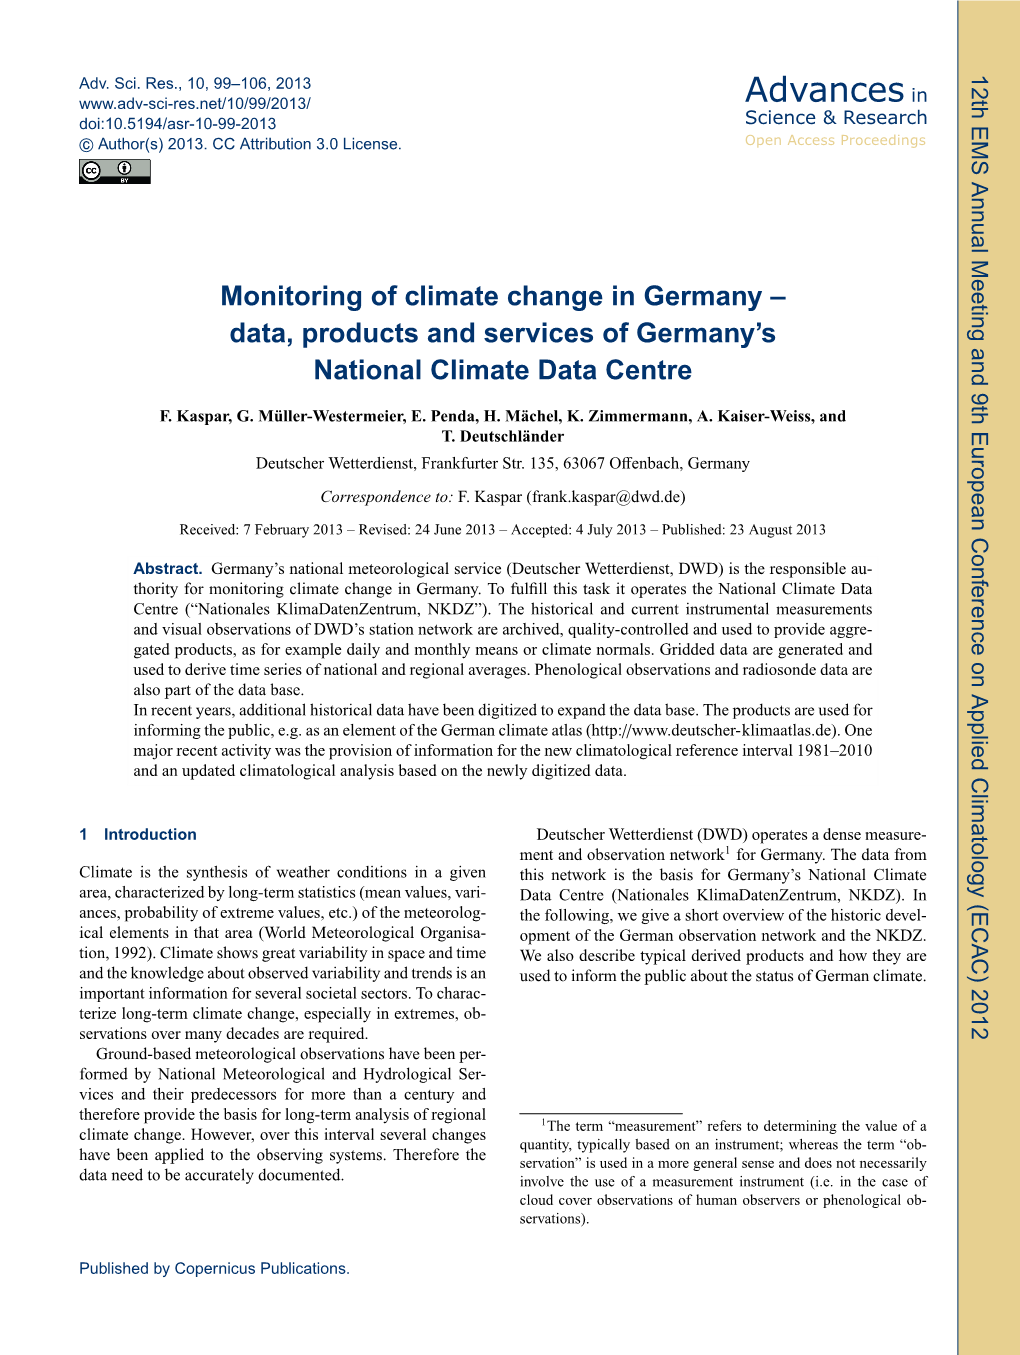 Monitoring of Climate Change in Germany–Data, Products And